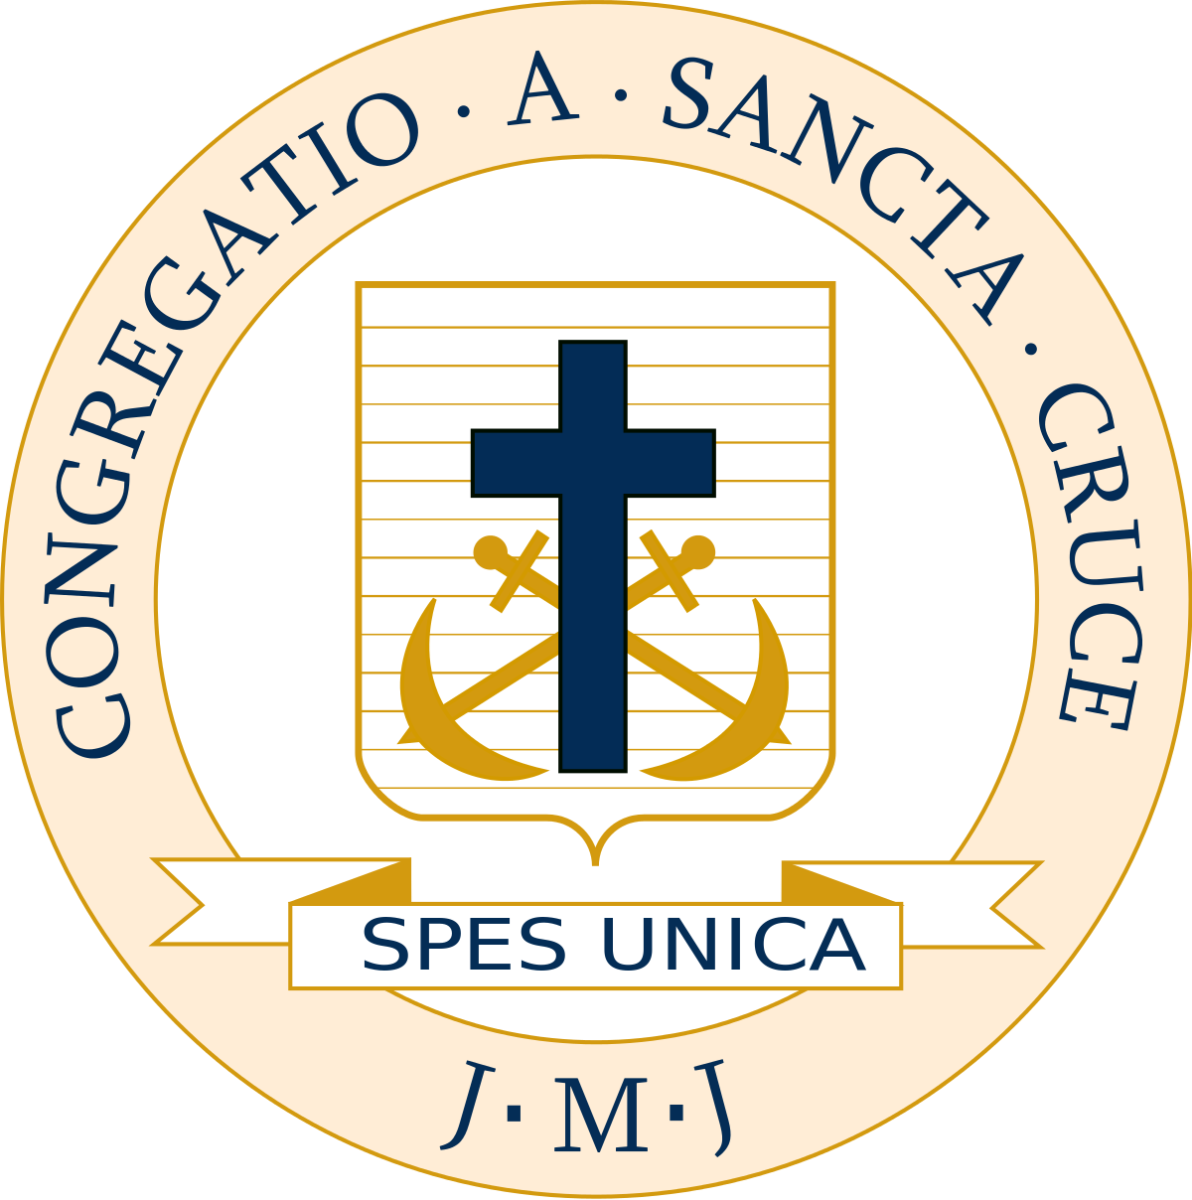 Seal of the Congregation of Holy Cross.